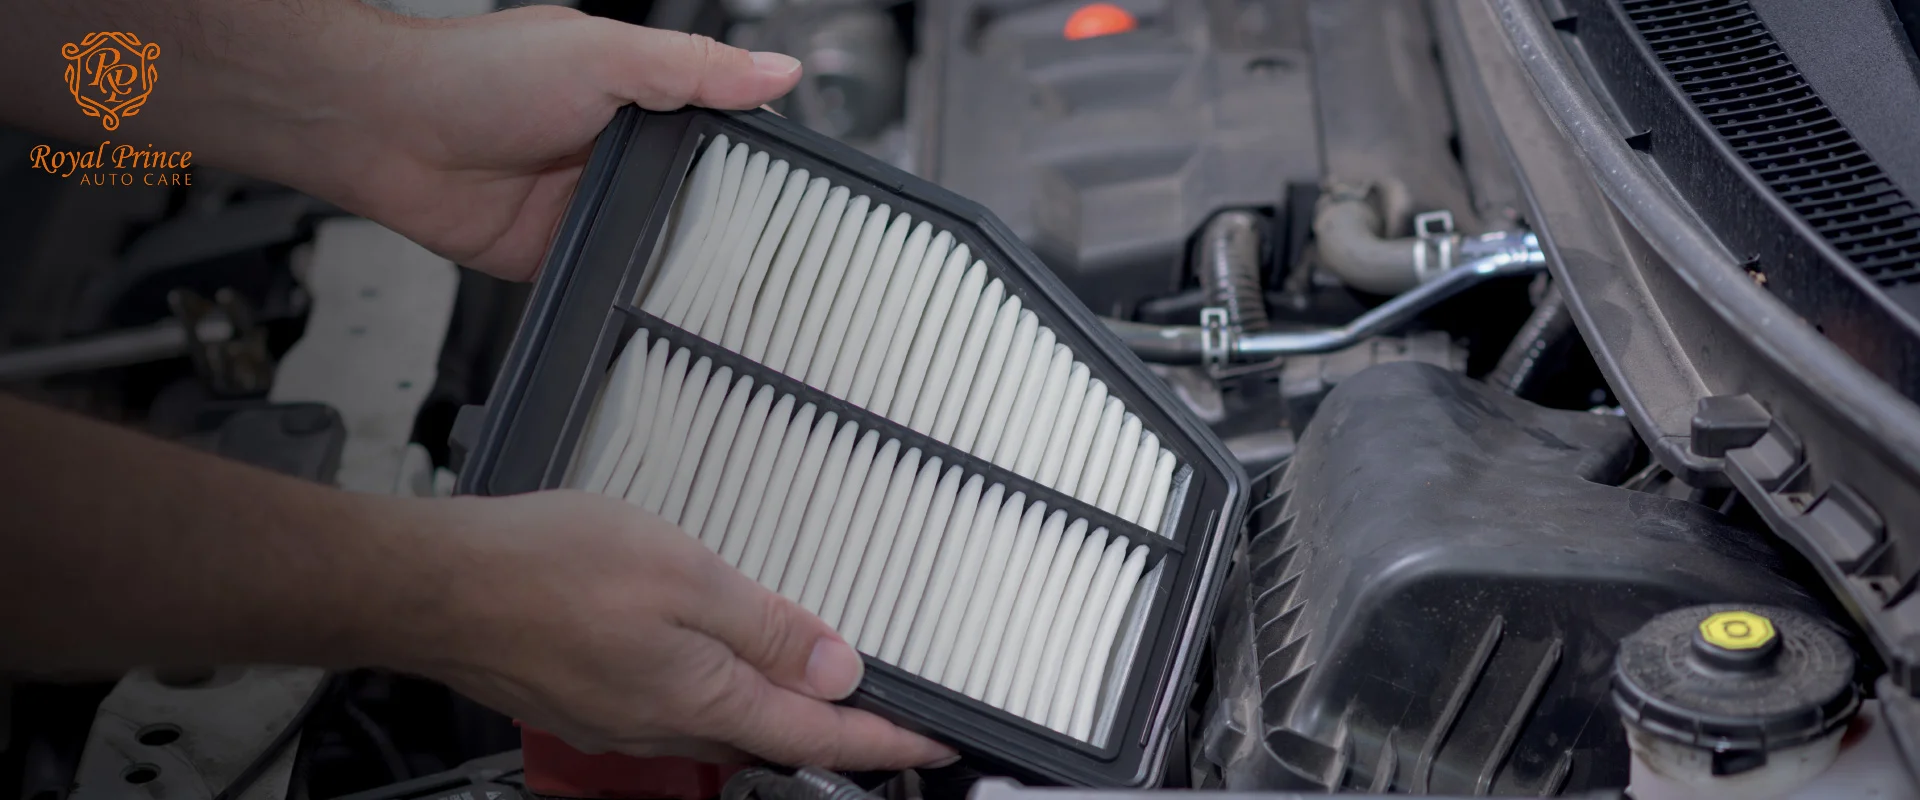 How to Choose the Right Car Air Filter for Improved Performance